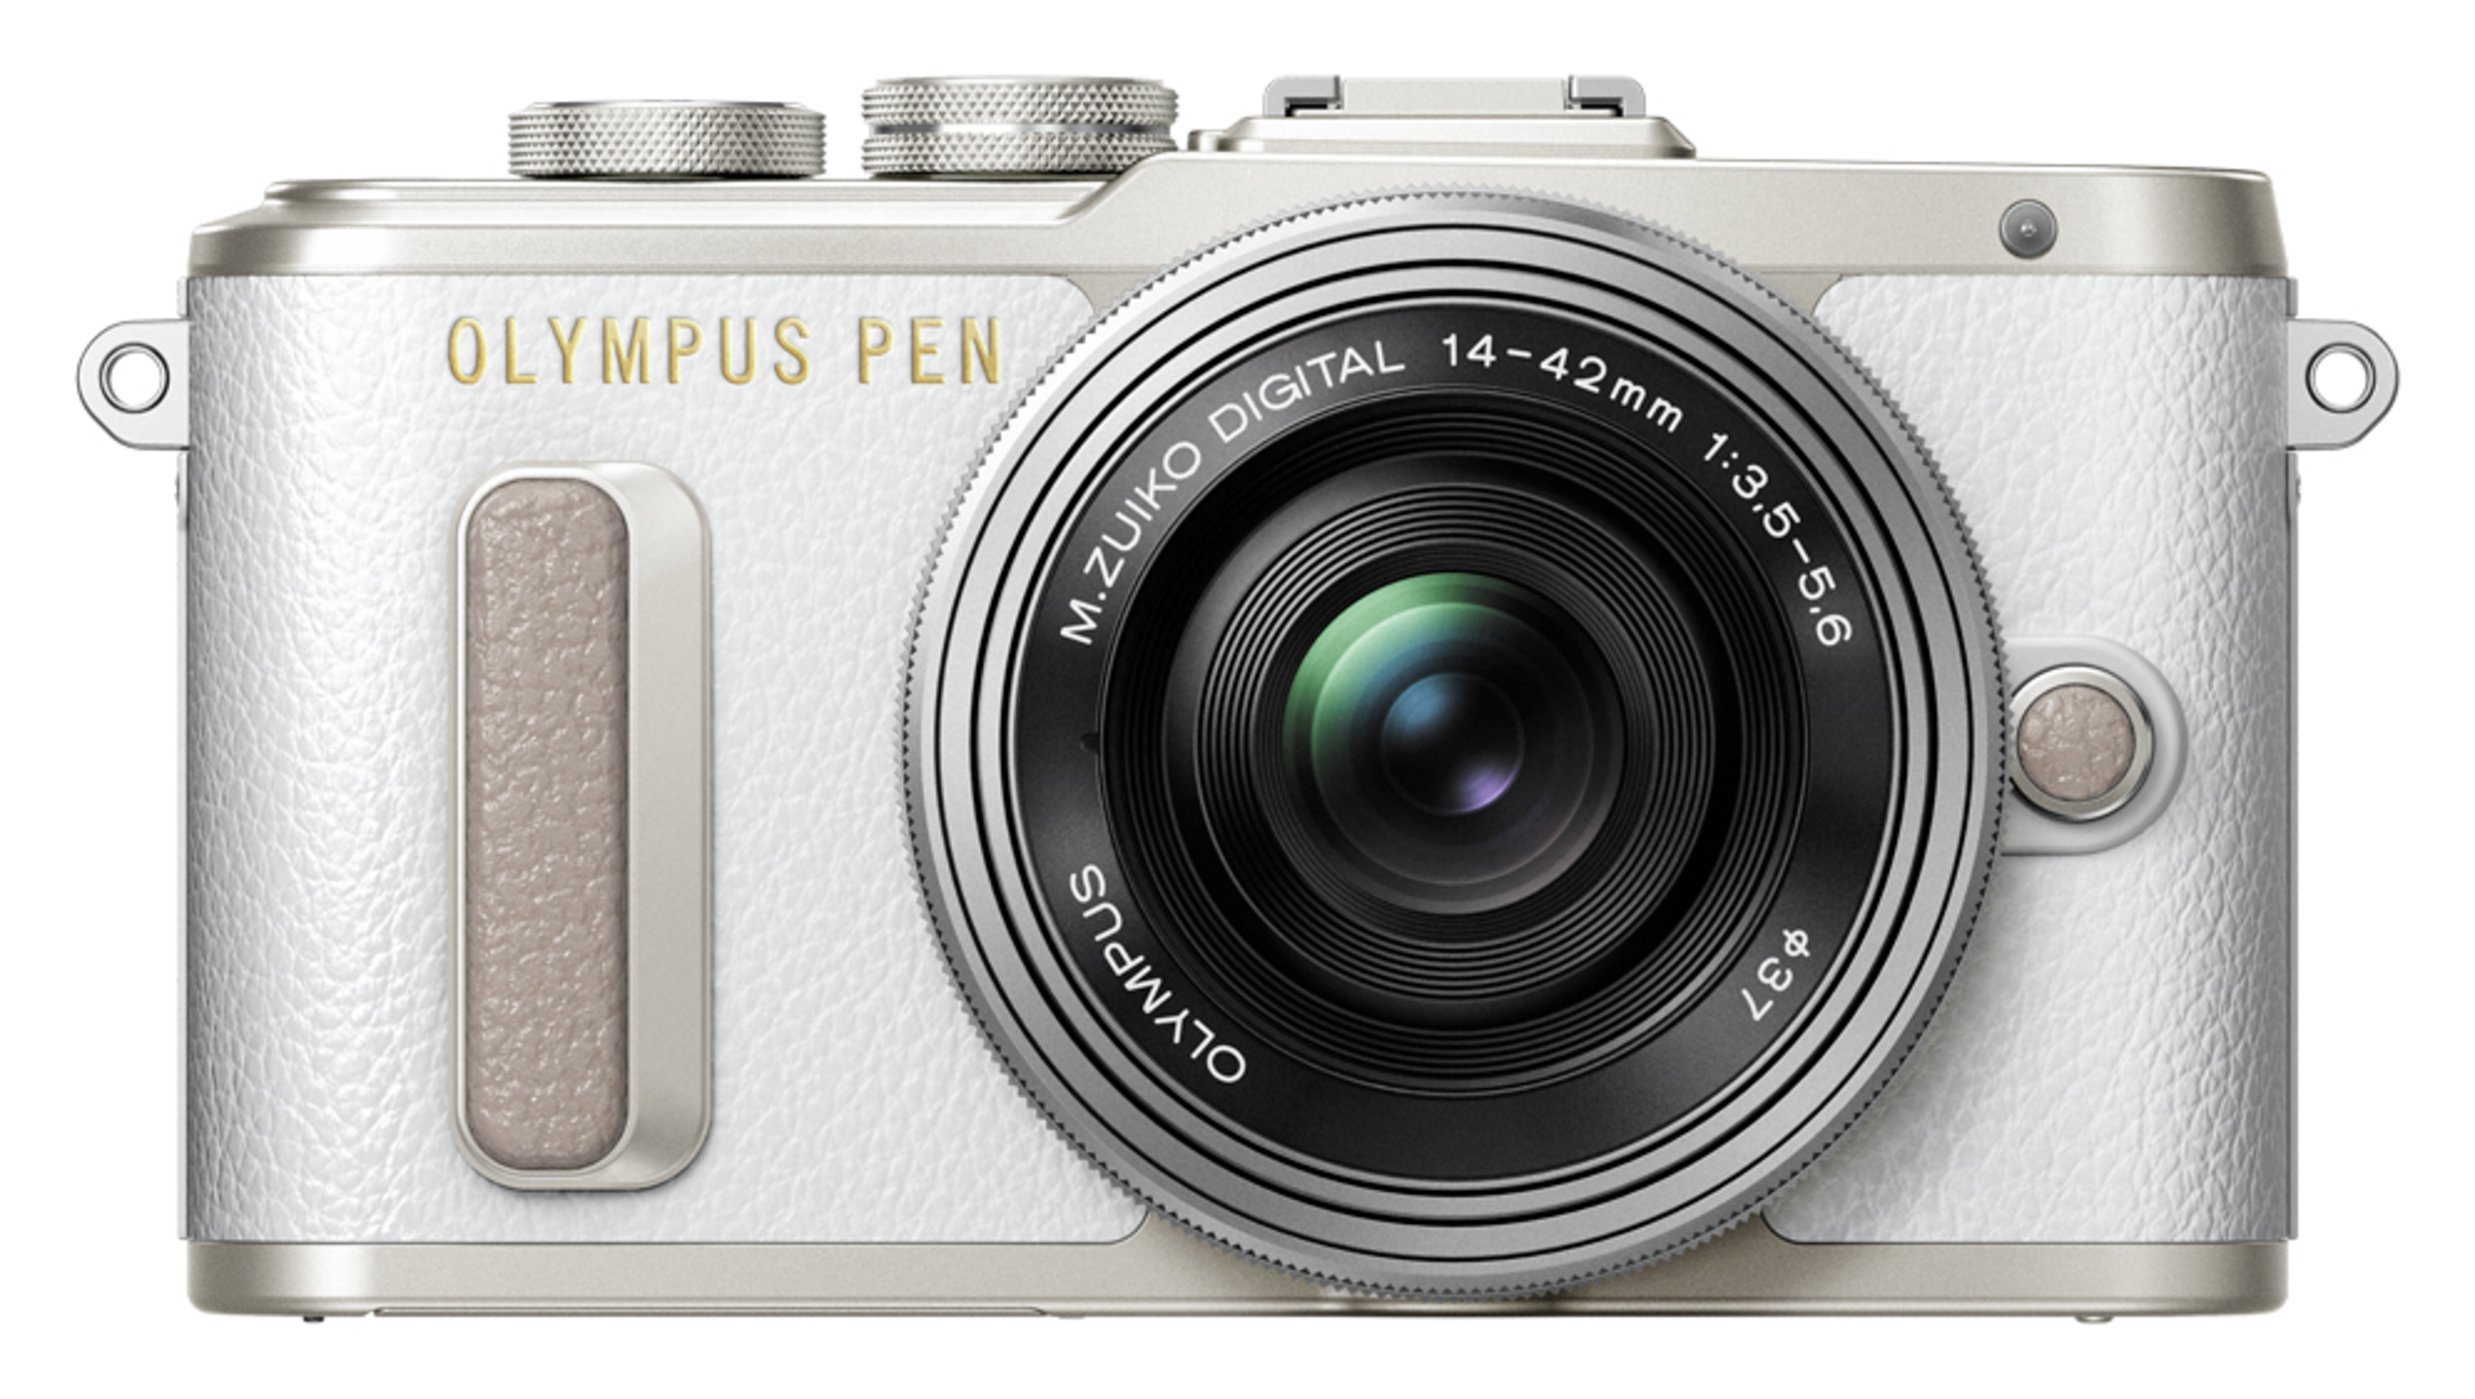 Olympus Pen E-Pl8 Mirrorless Camera With 14-42mm Lens Review